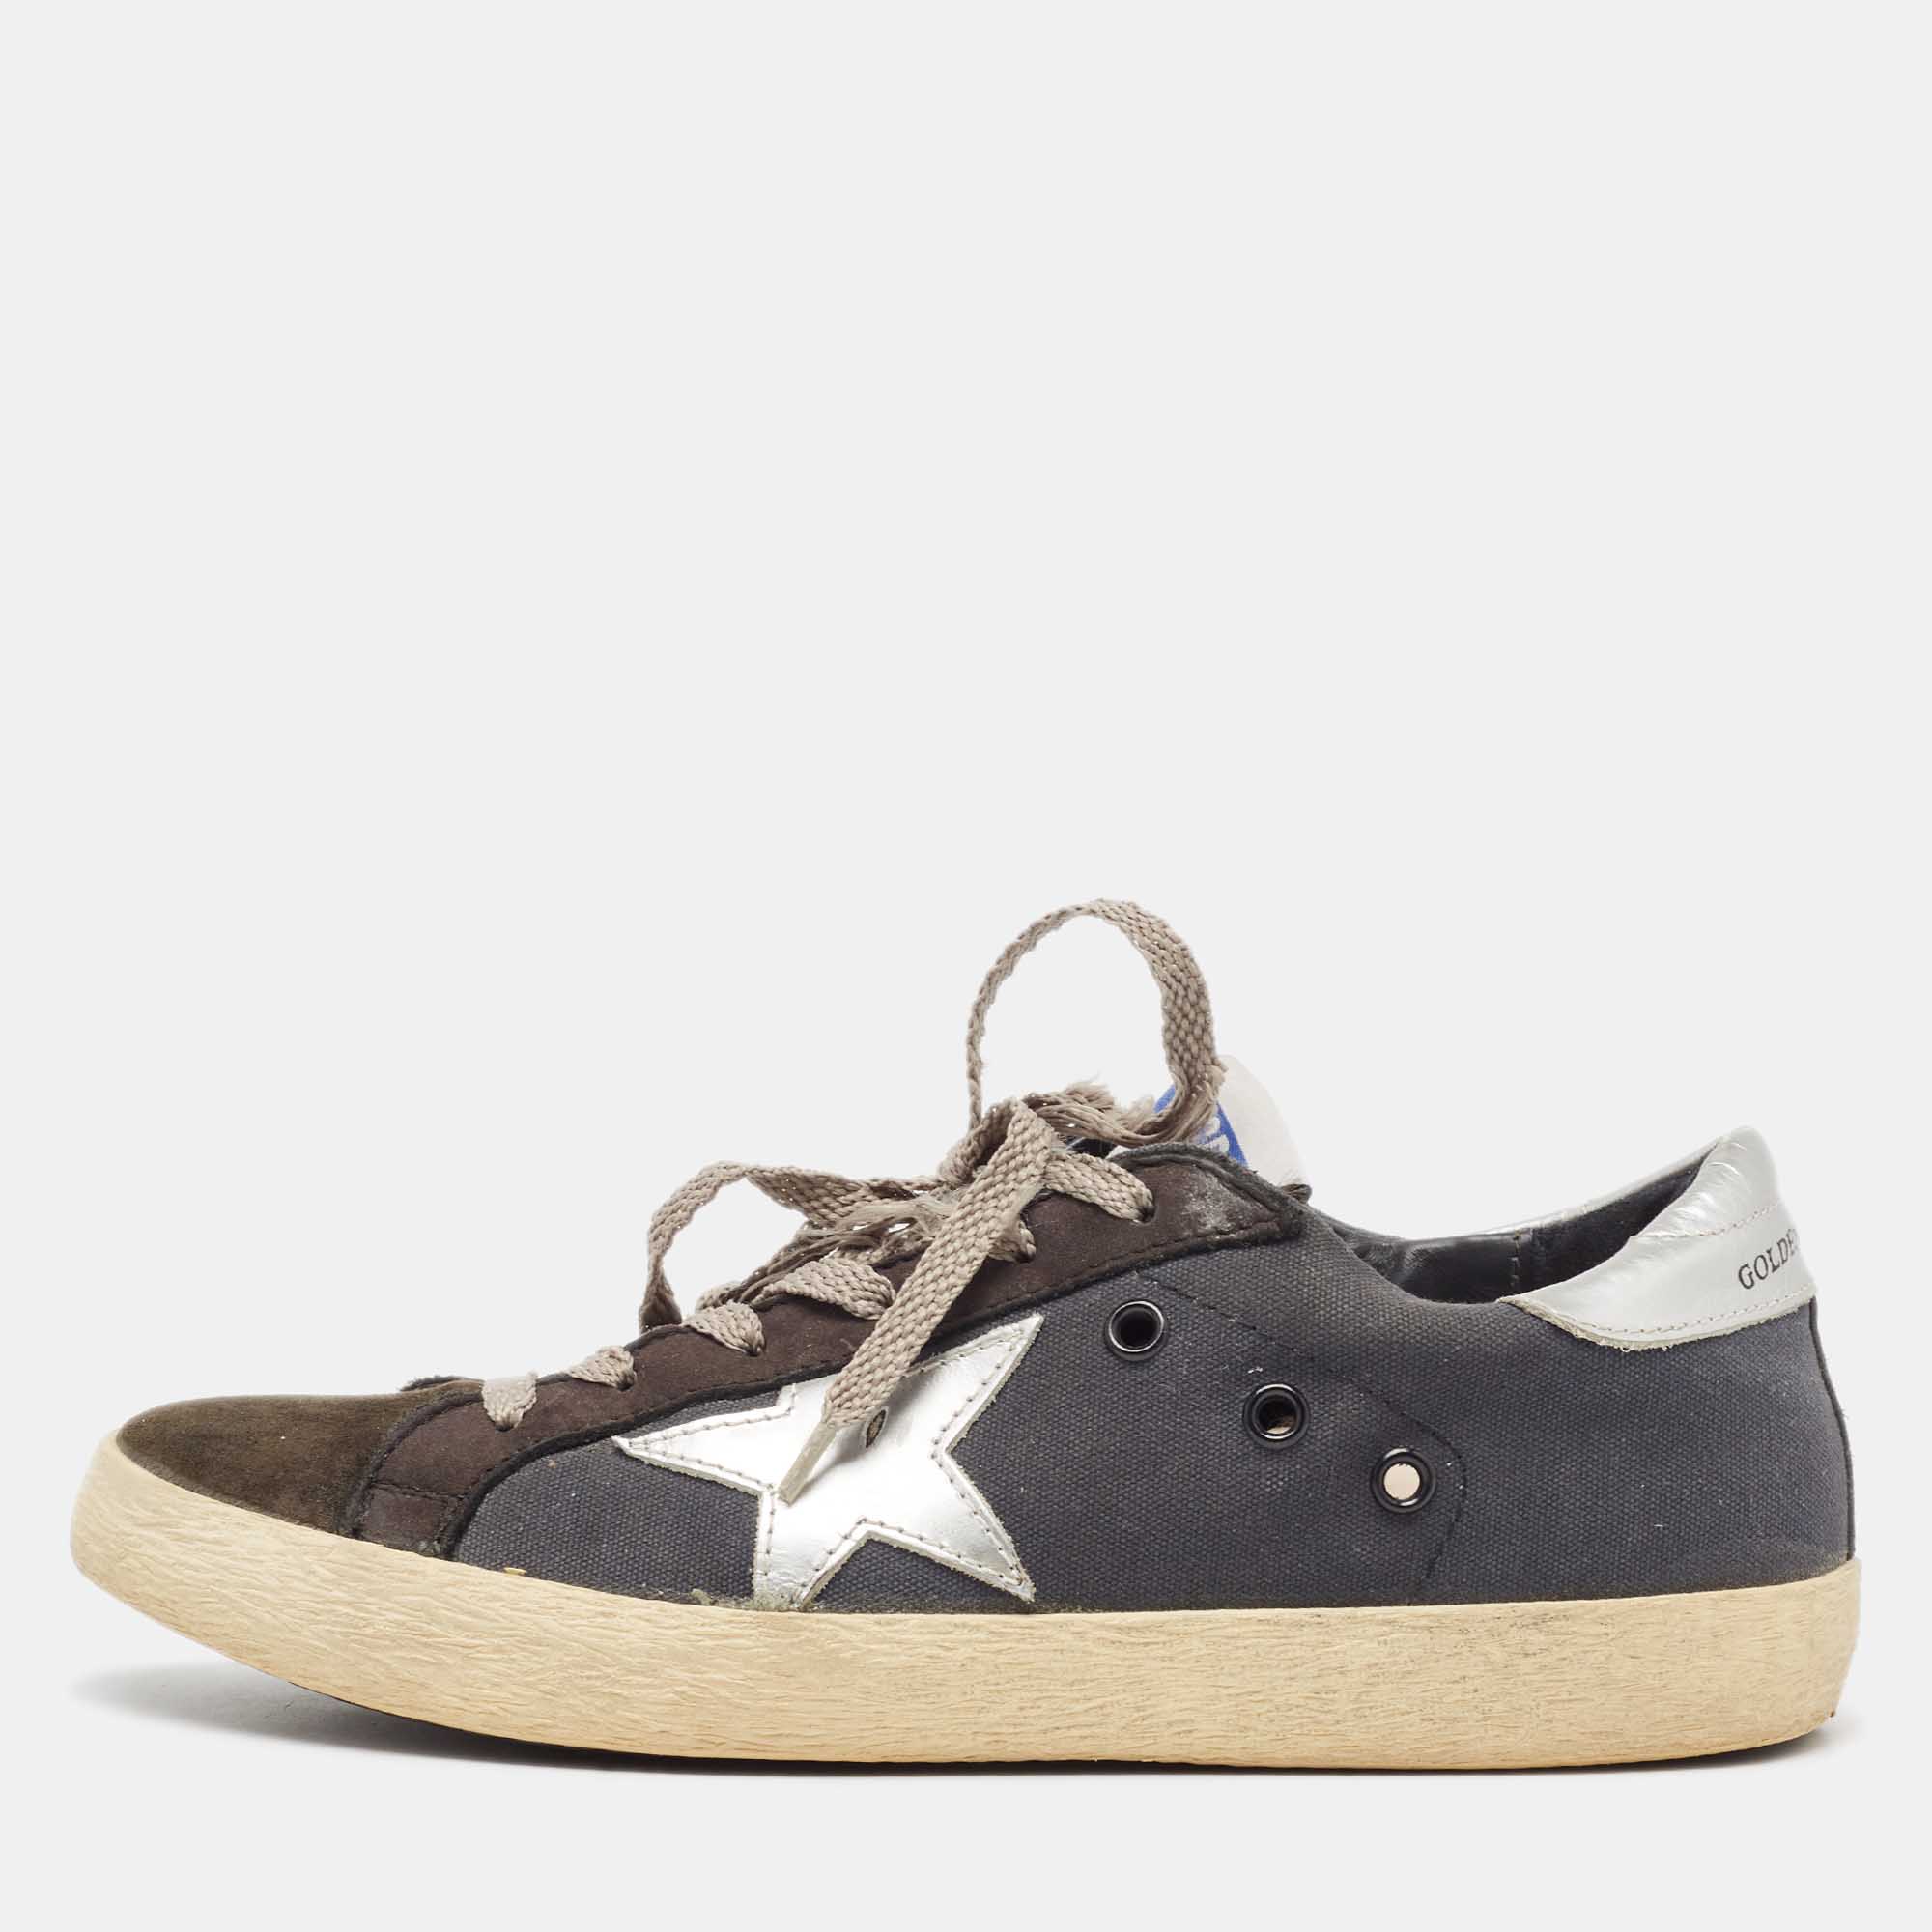 Golden goose black canvas and leather superstar sneakers size 39